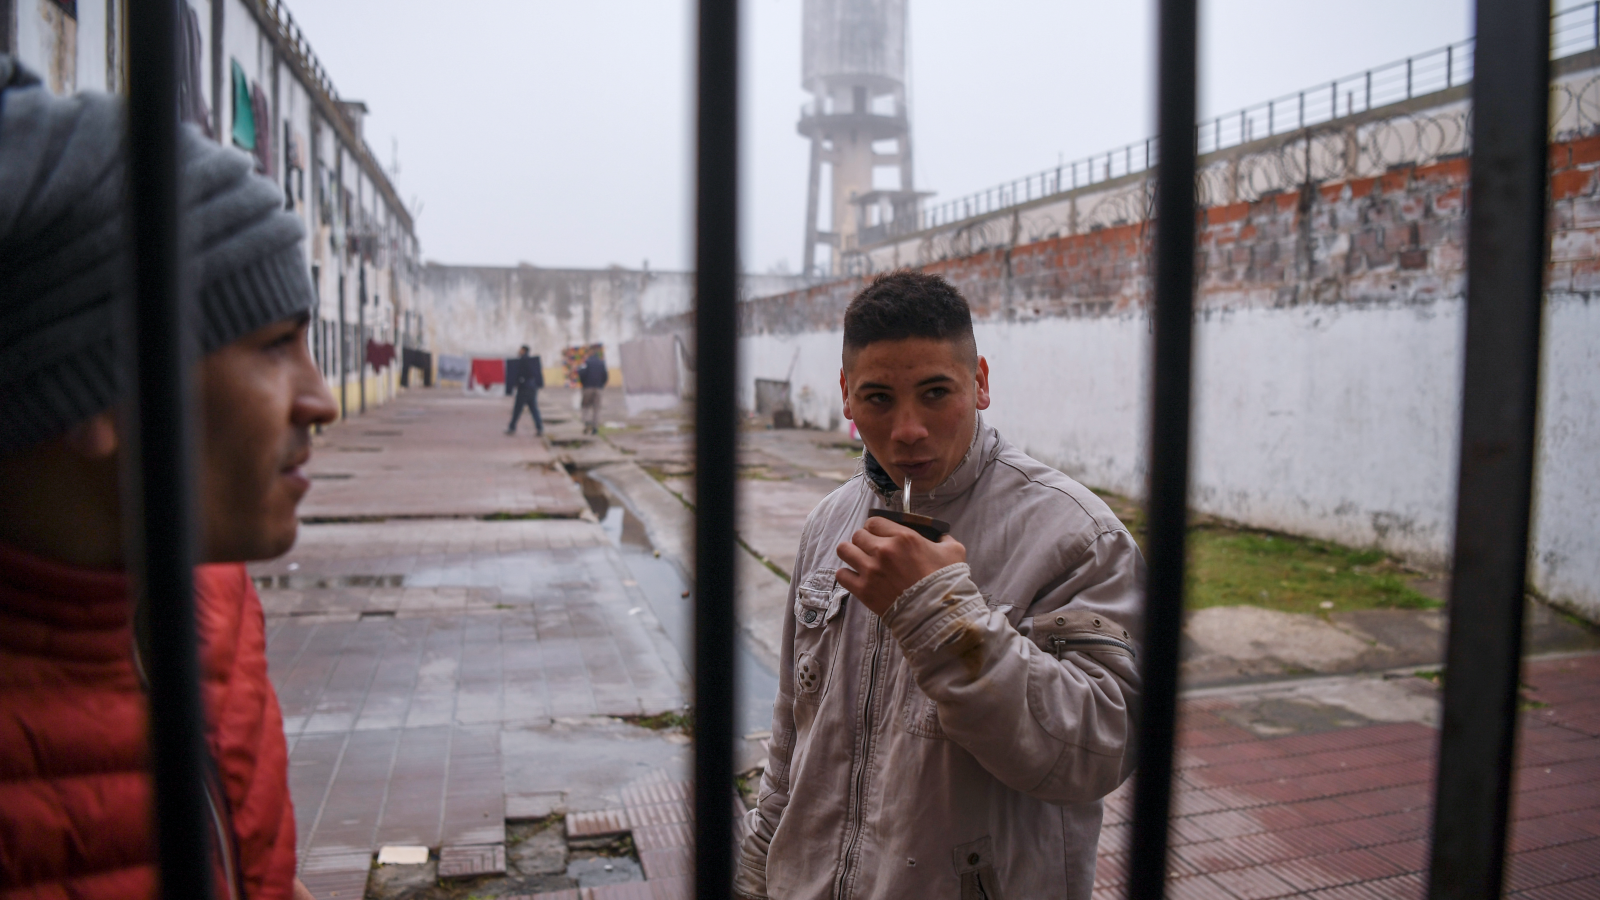 Teaching inmates in Argentina to make video games in prison